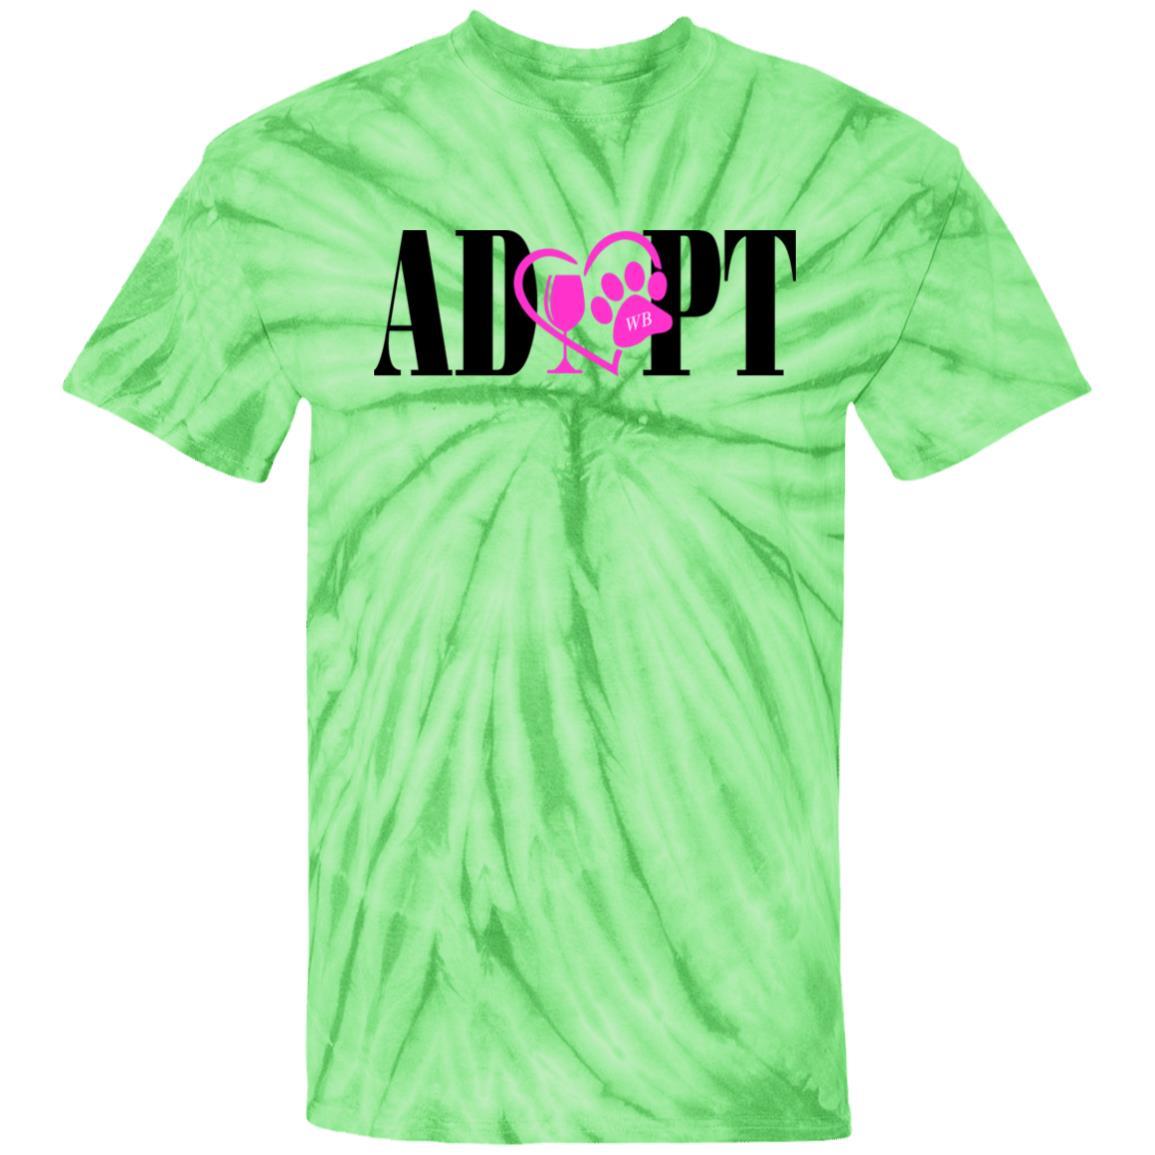 T-Shirts SpiderLime / S WineyBitches.Co “Adopt” 100% Cotton Tie Dye T-Shirt- Pink Heart- Blk Lettering WineyBitchesCo